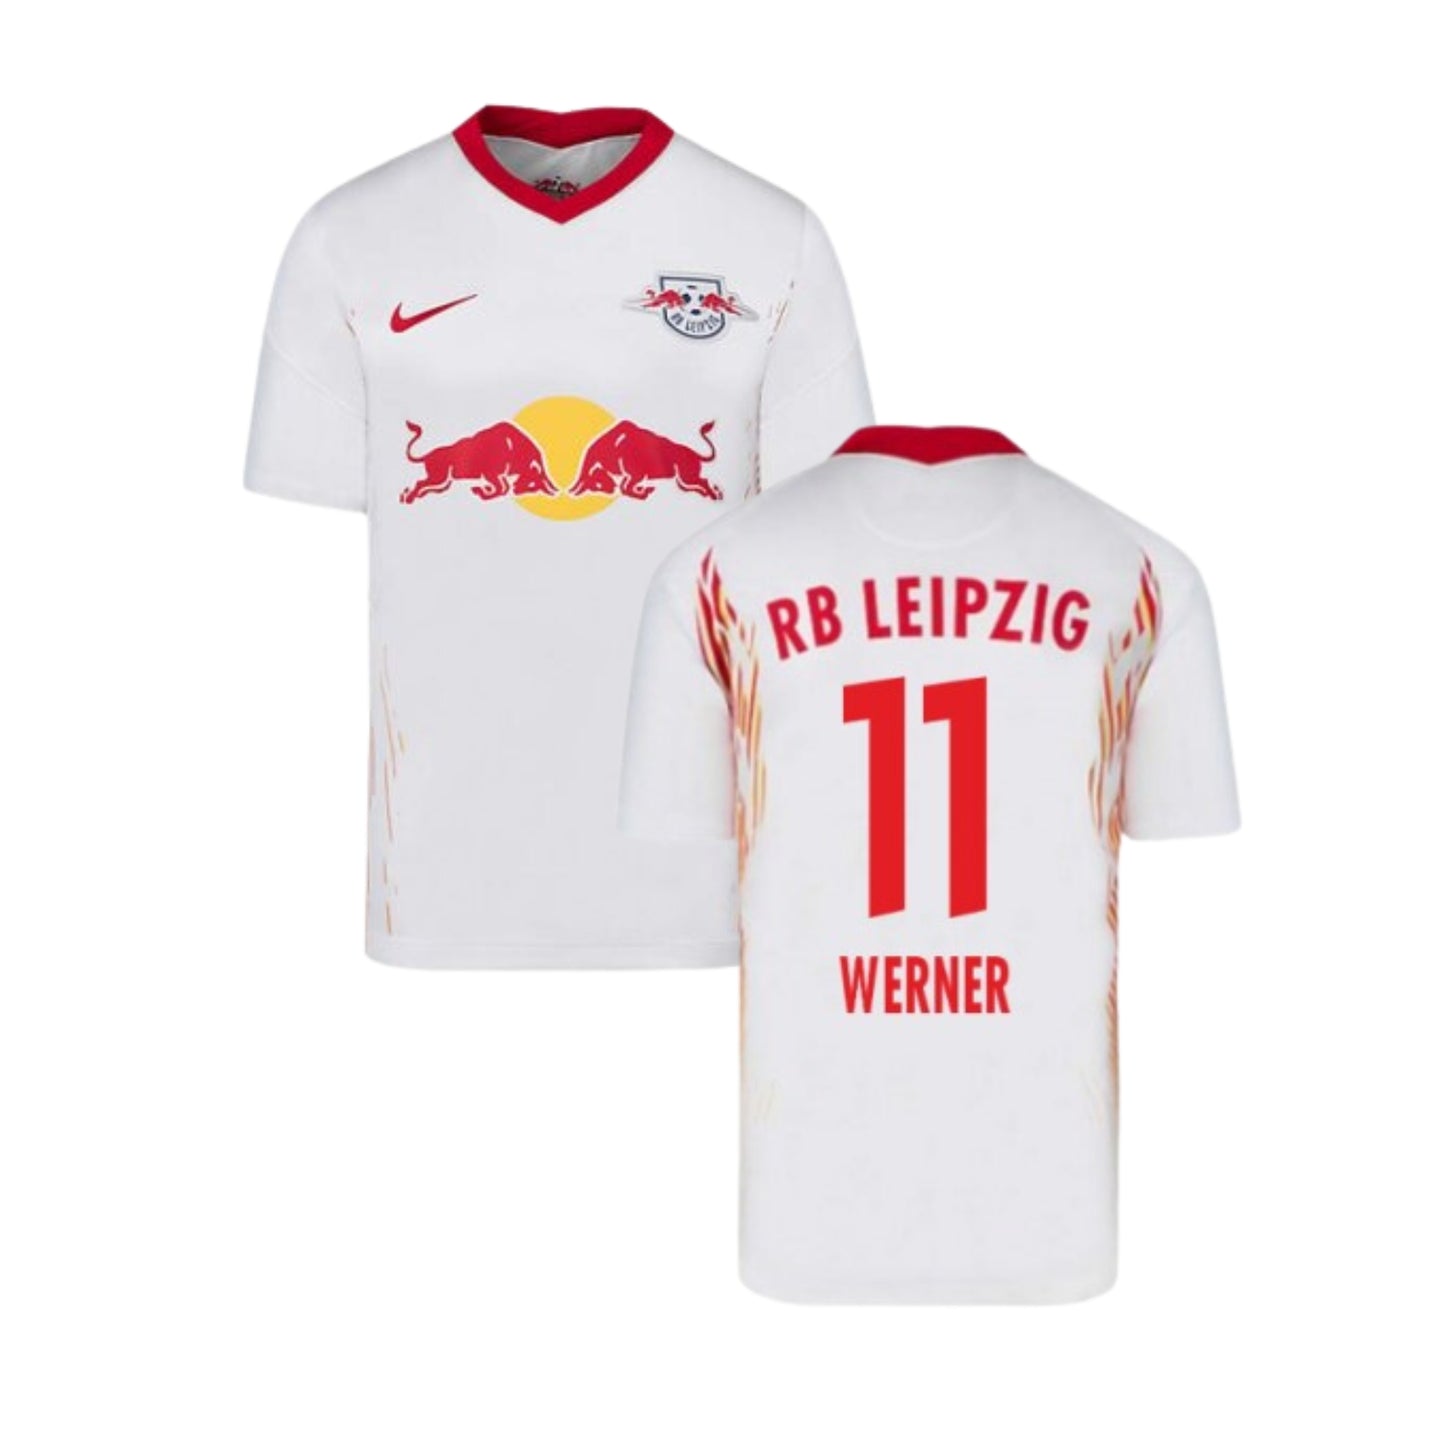 Timo Werner RB Leipzig 11 Jersey